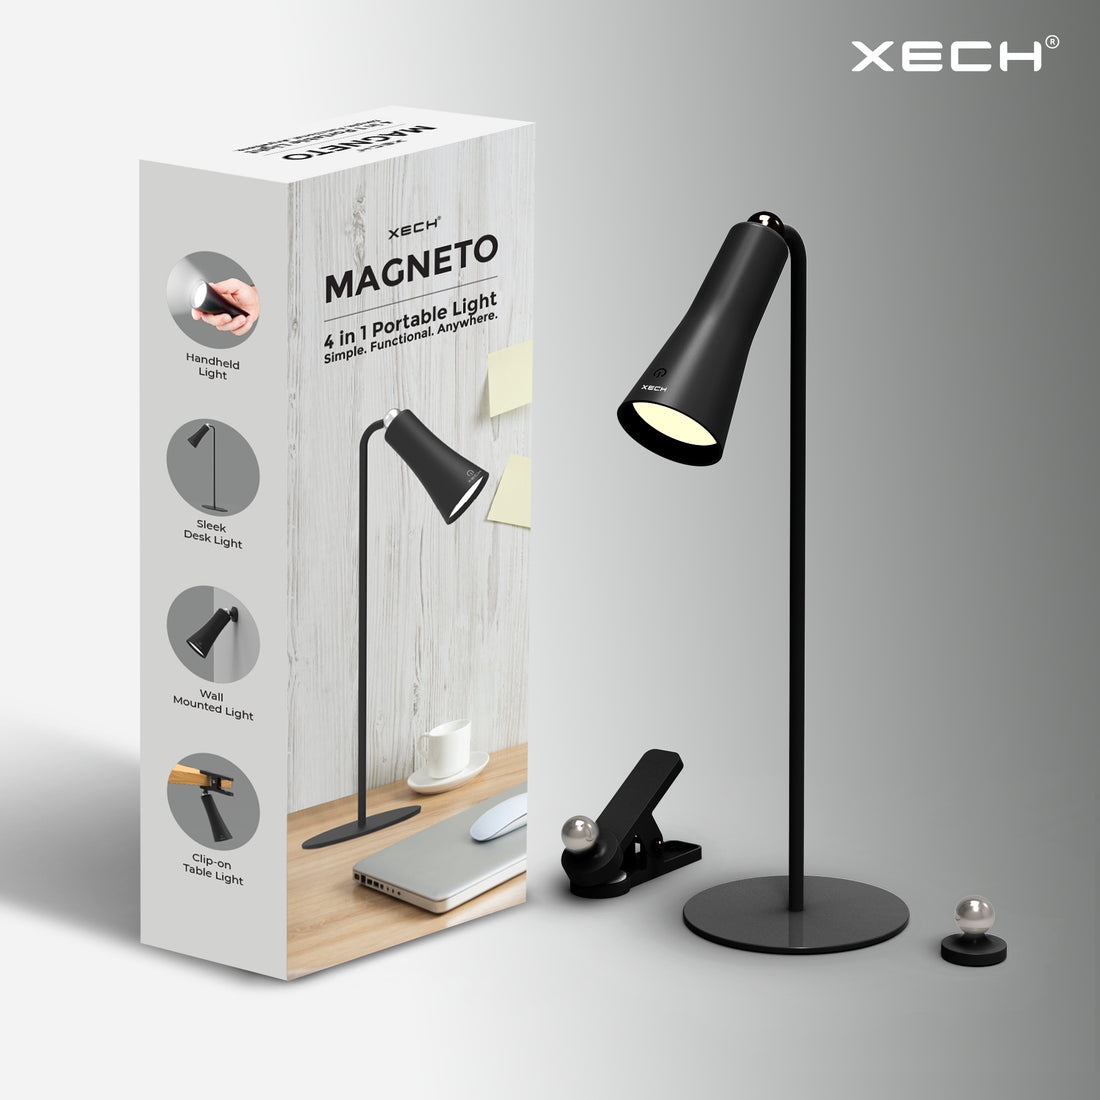 Why XECH Magneto is the Ideal Lamp for Reading Enthusiasts